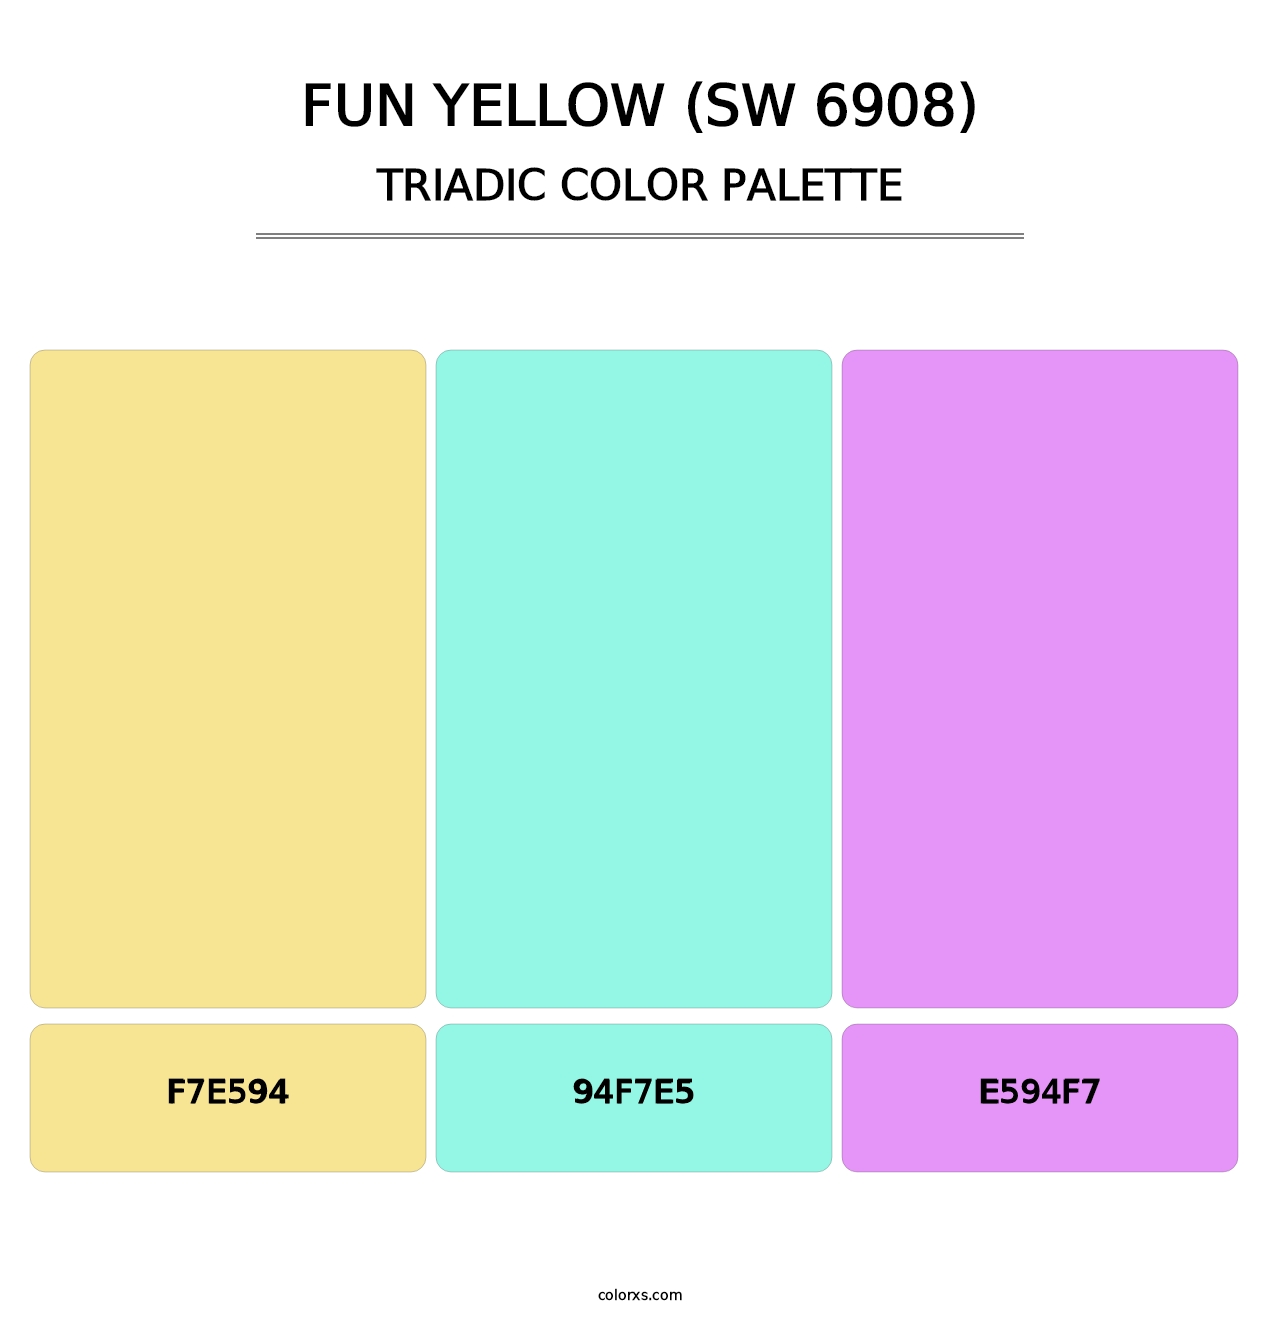 Fun Yellow (SW 6908) - Triadic Color Palette